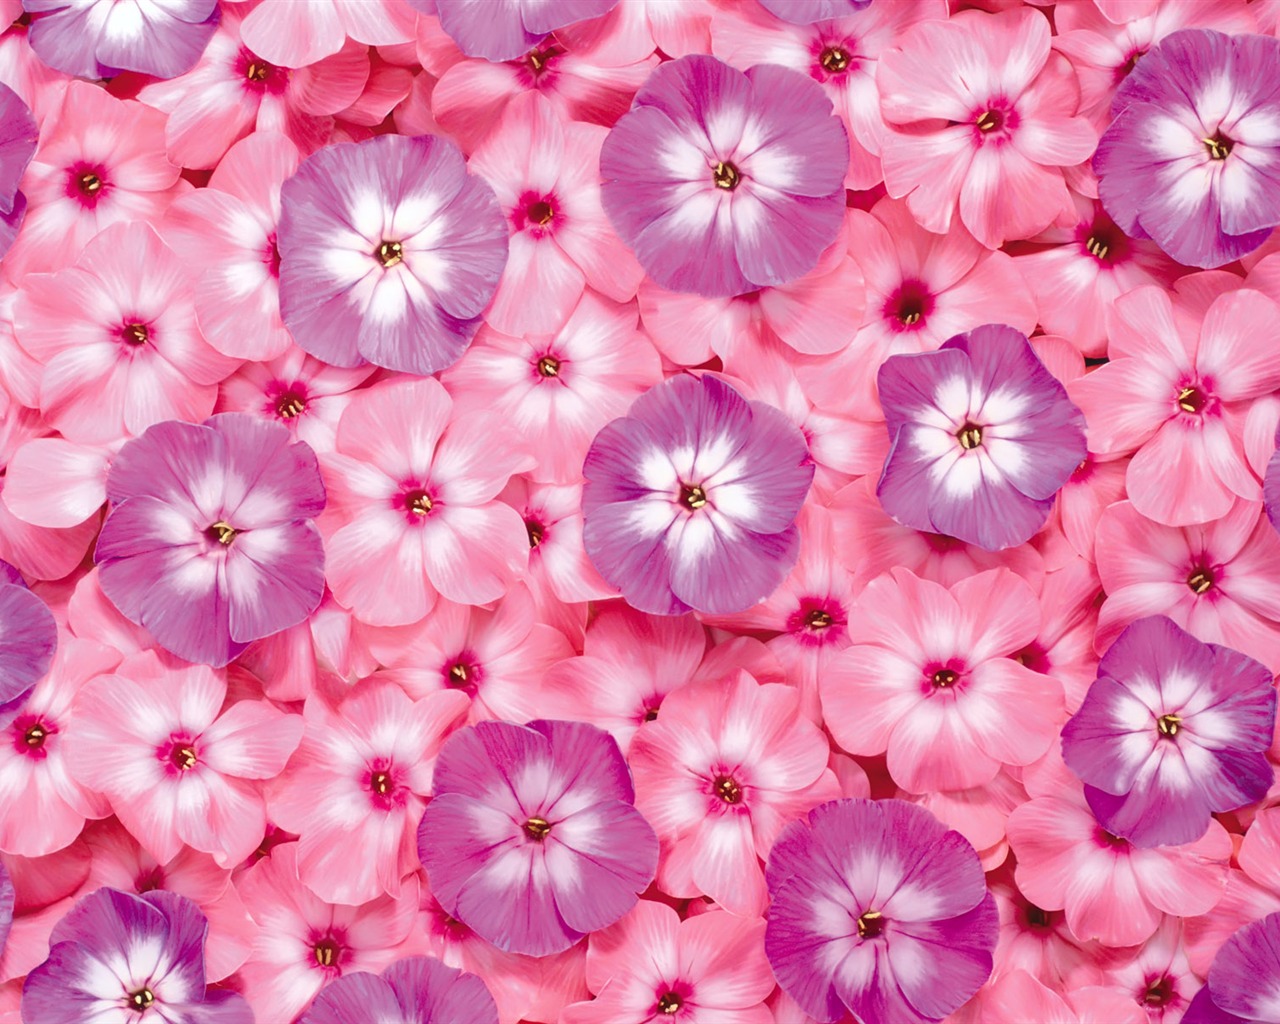 Surrounded by stunning flowers wallpaper #5 - 1280x1024